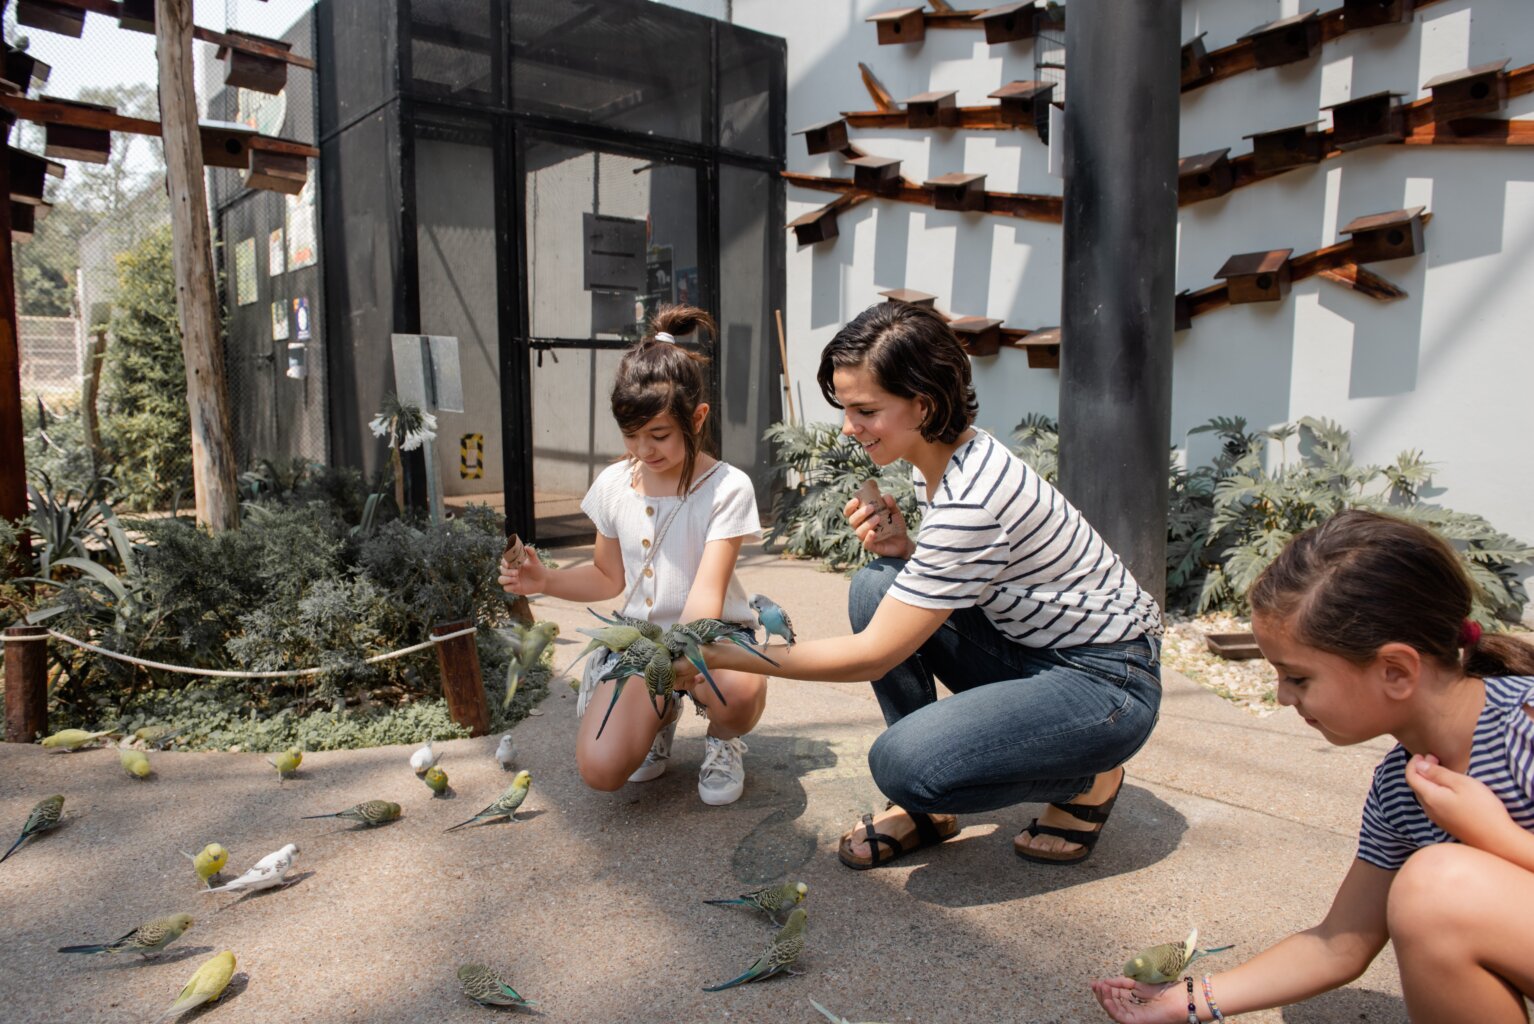 A mother and her two daughters feeding birds in an aviary.